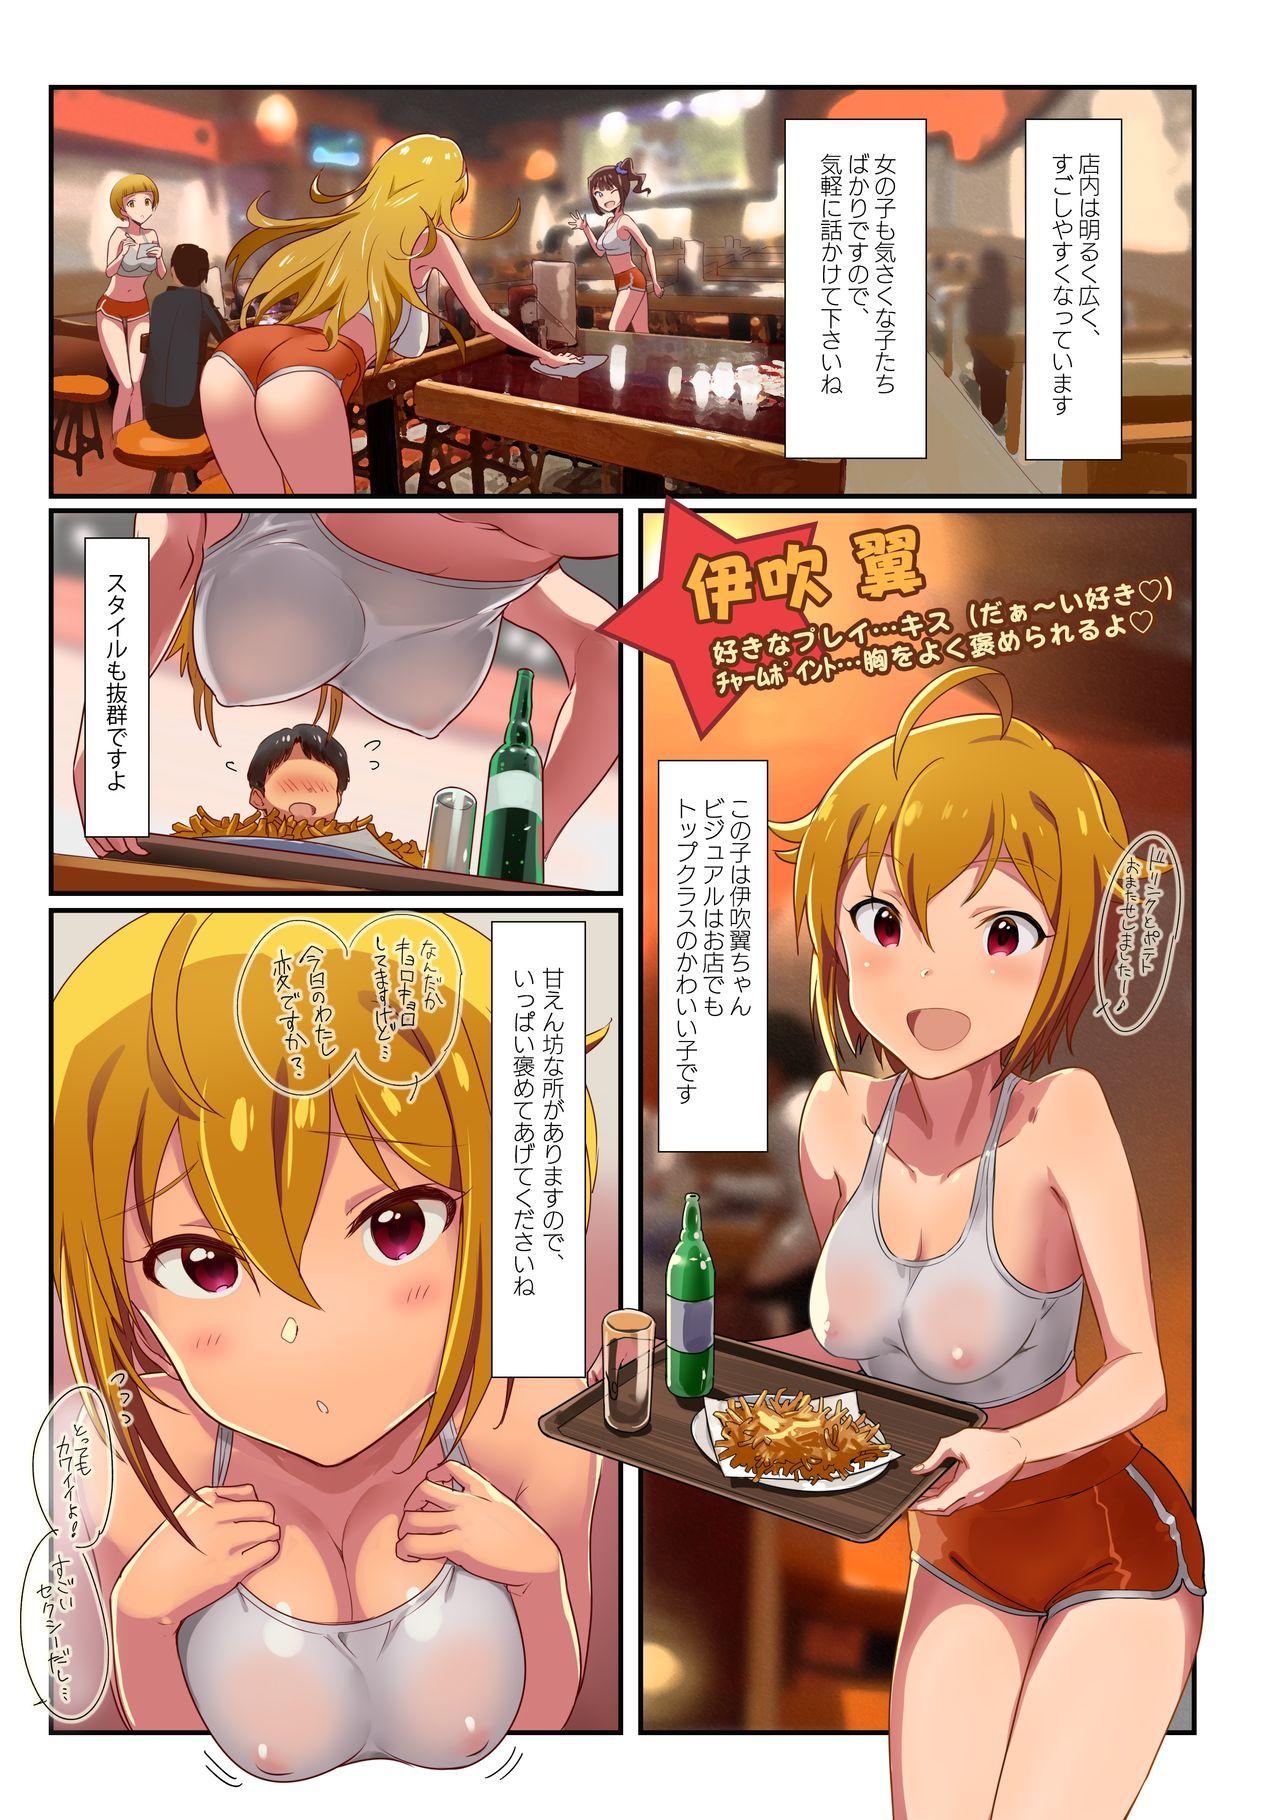 Plumper Oshigoto Theater 6 - The idolmaster Blondes - Page 3